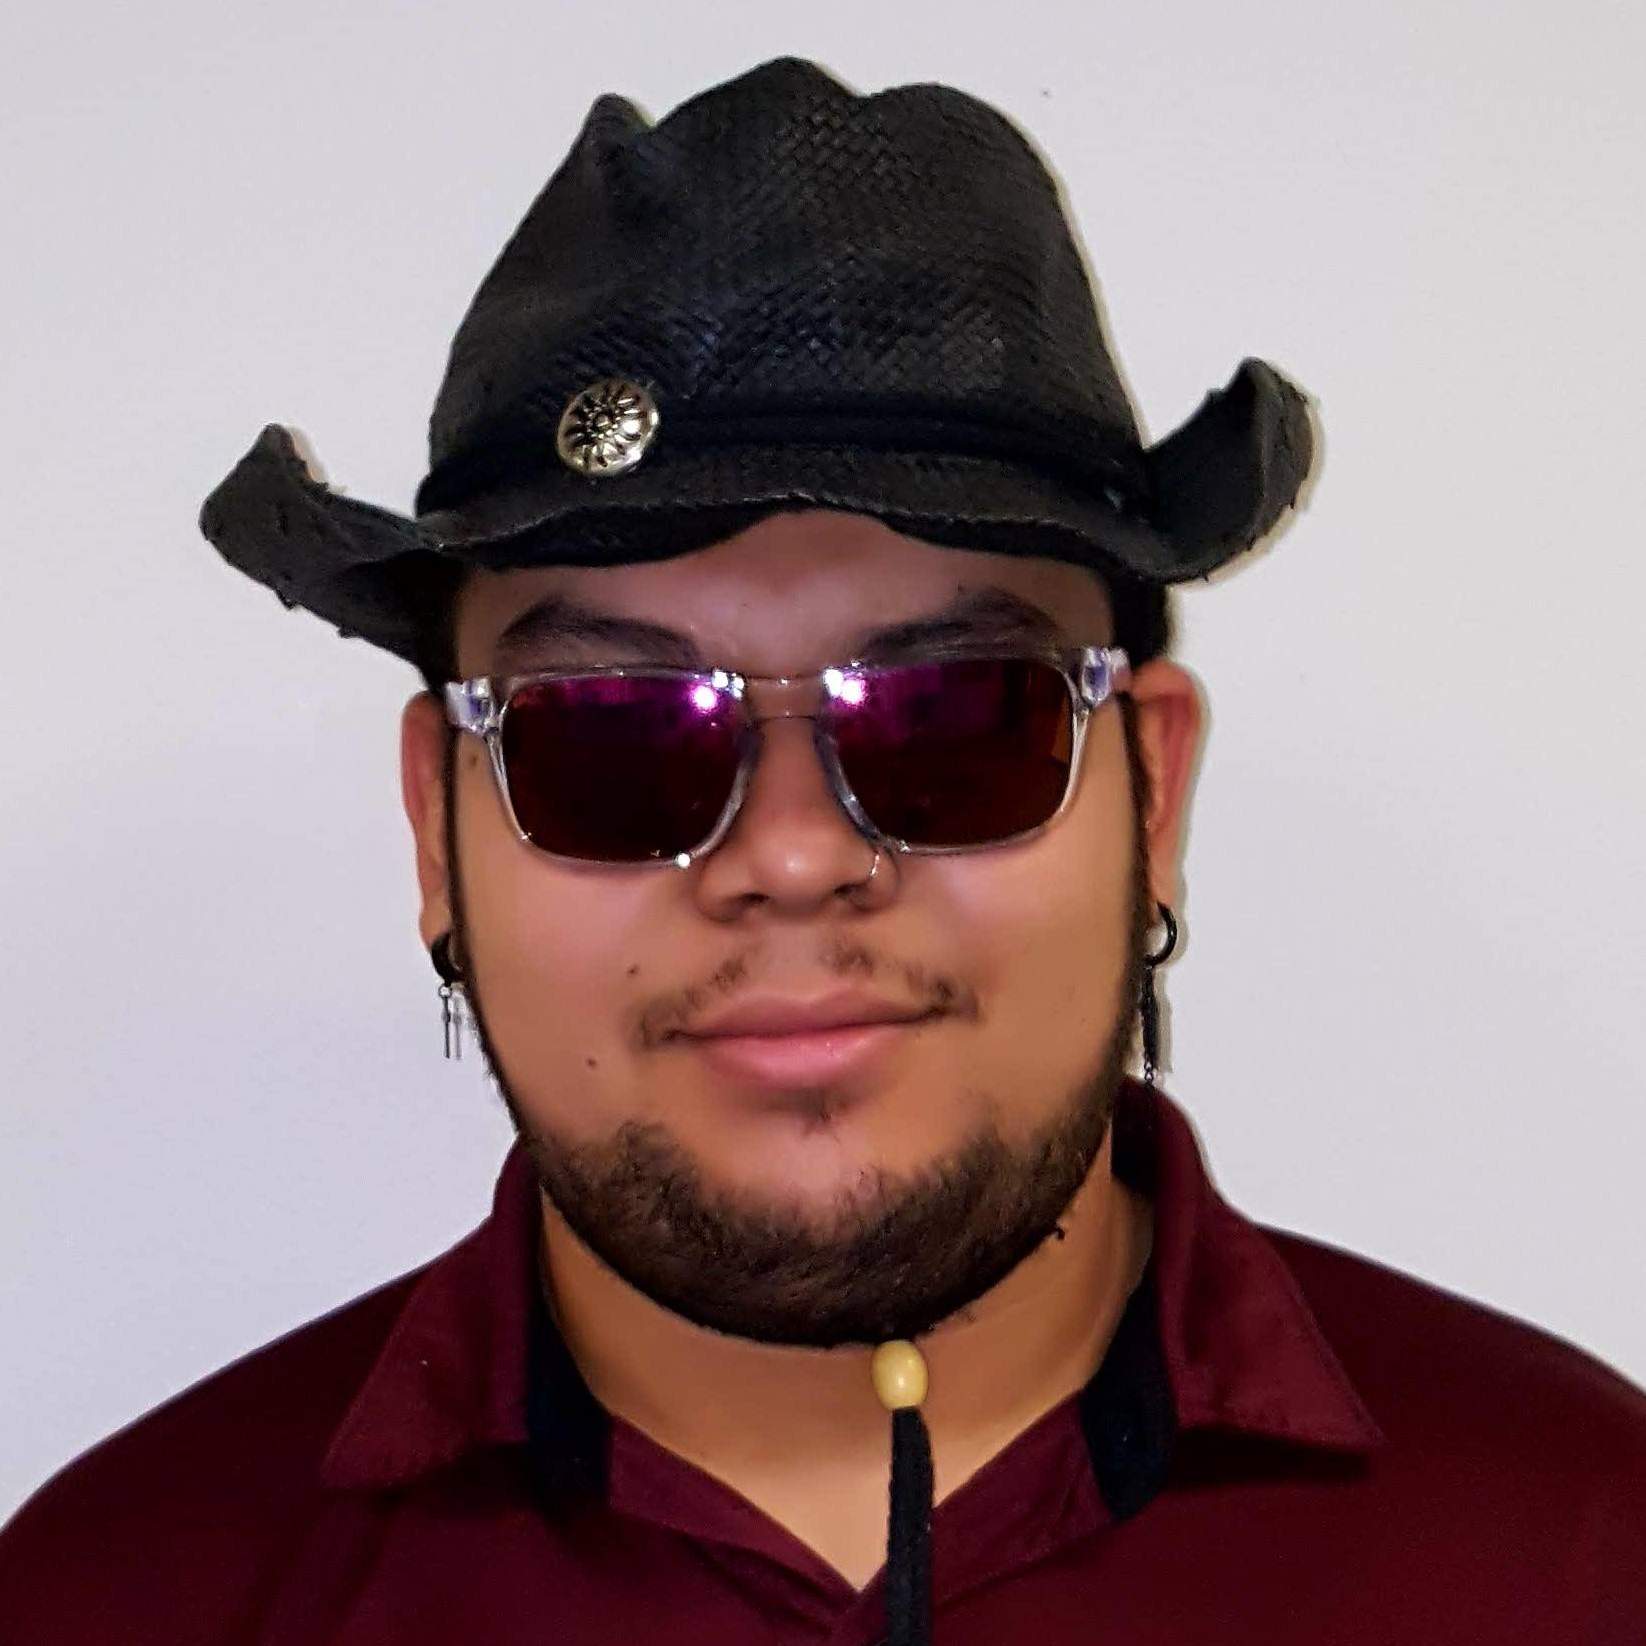 student photo with hat & glasses